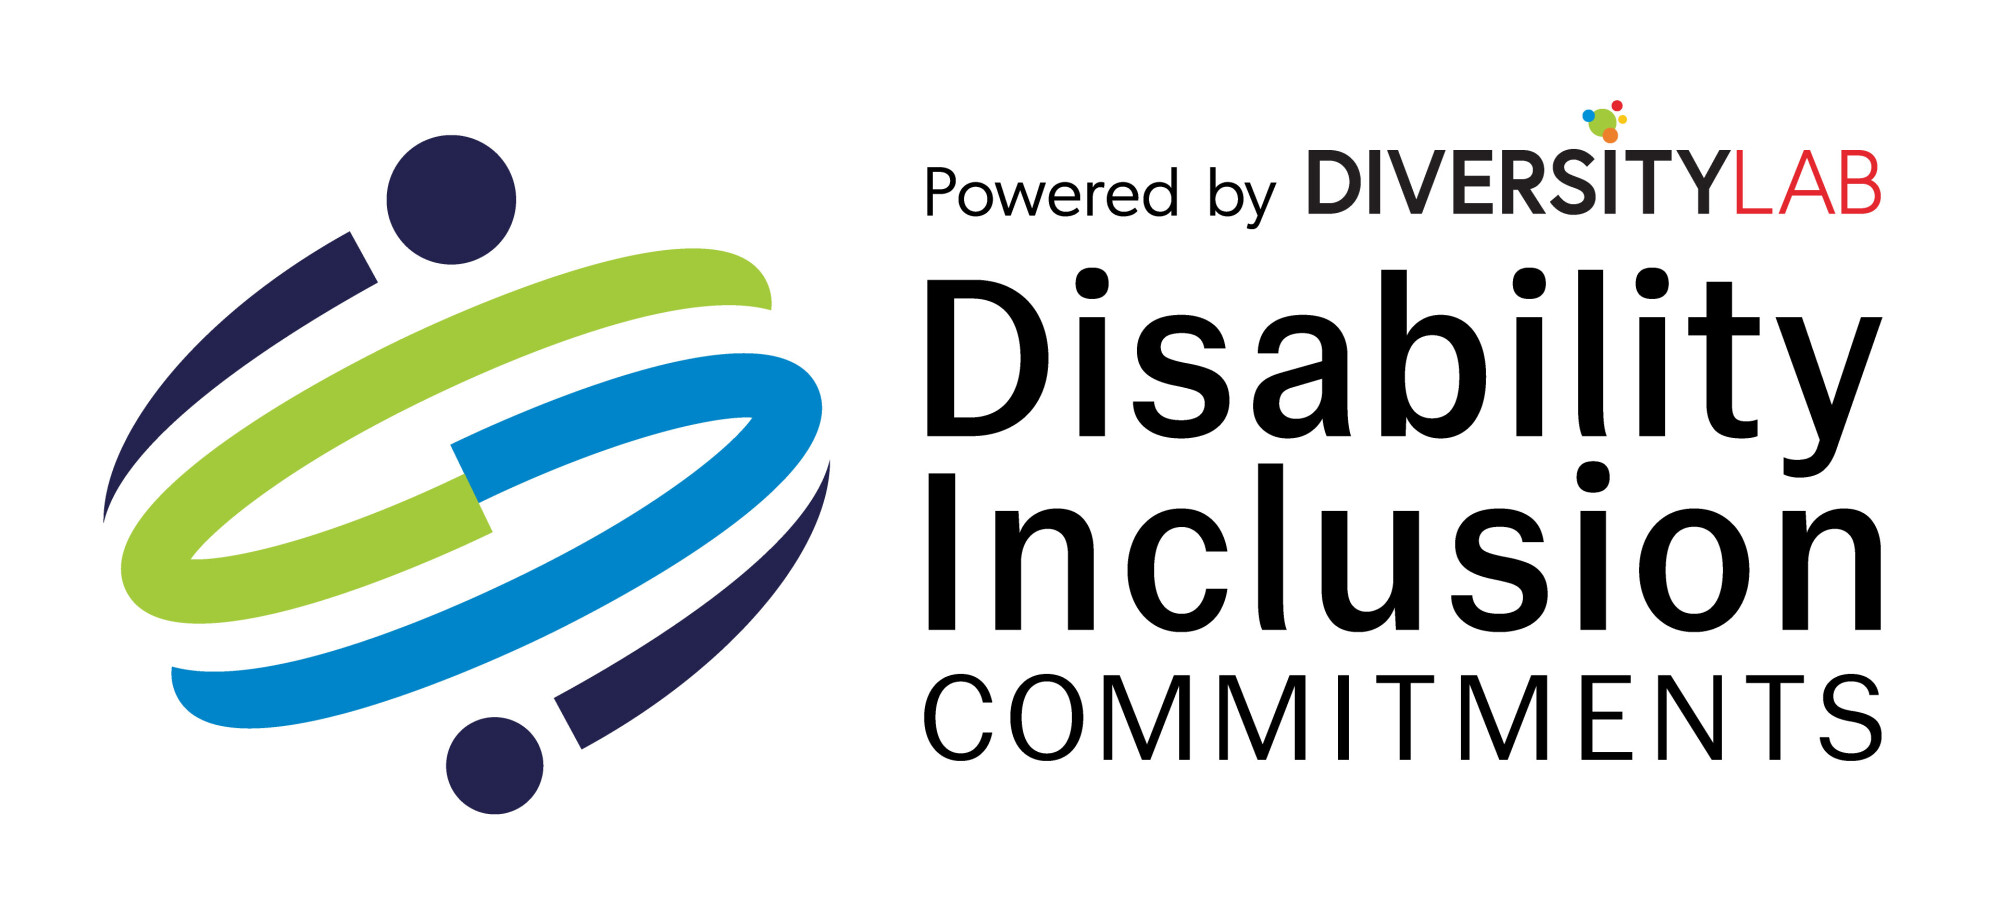 Blue and green swirl logo with text reading "Powered by Diversity Lab; Disability Inclusion Commitments"